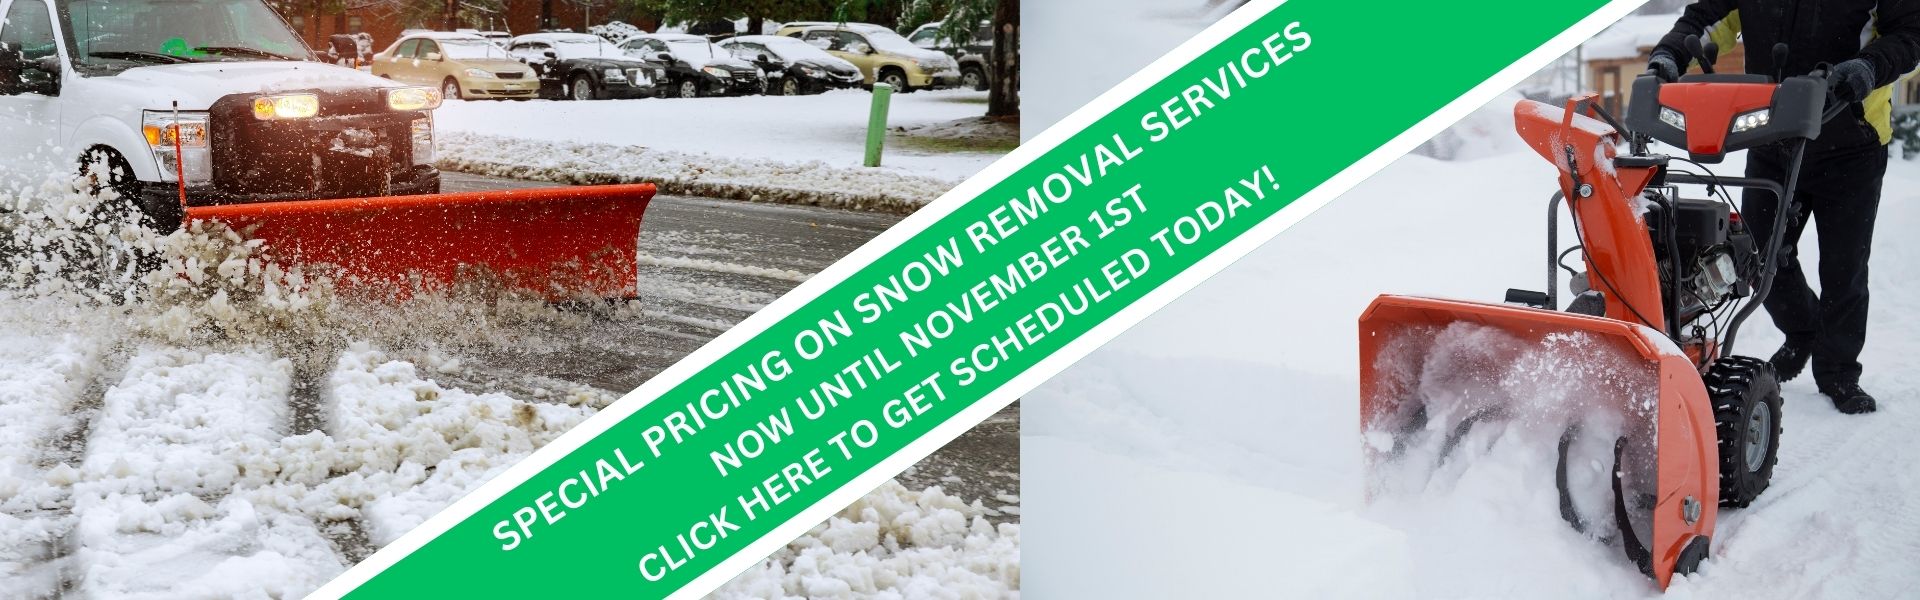 Property Management Snow Removal Services Special Pricing by Go Pave Utah Green